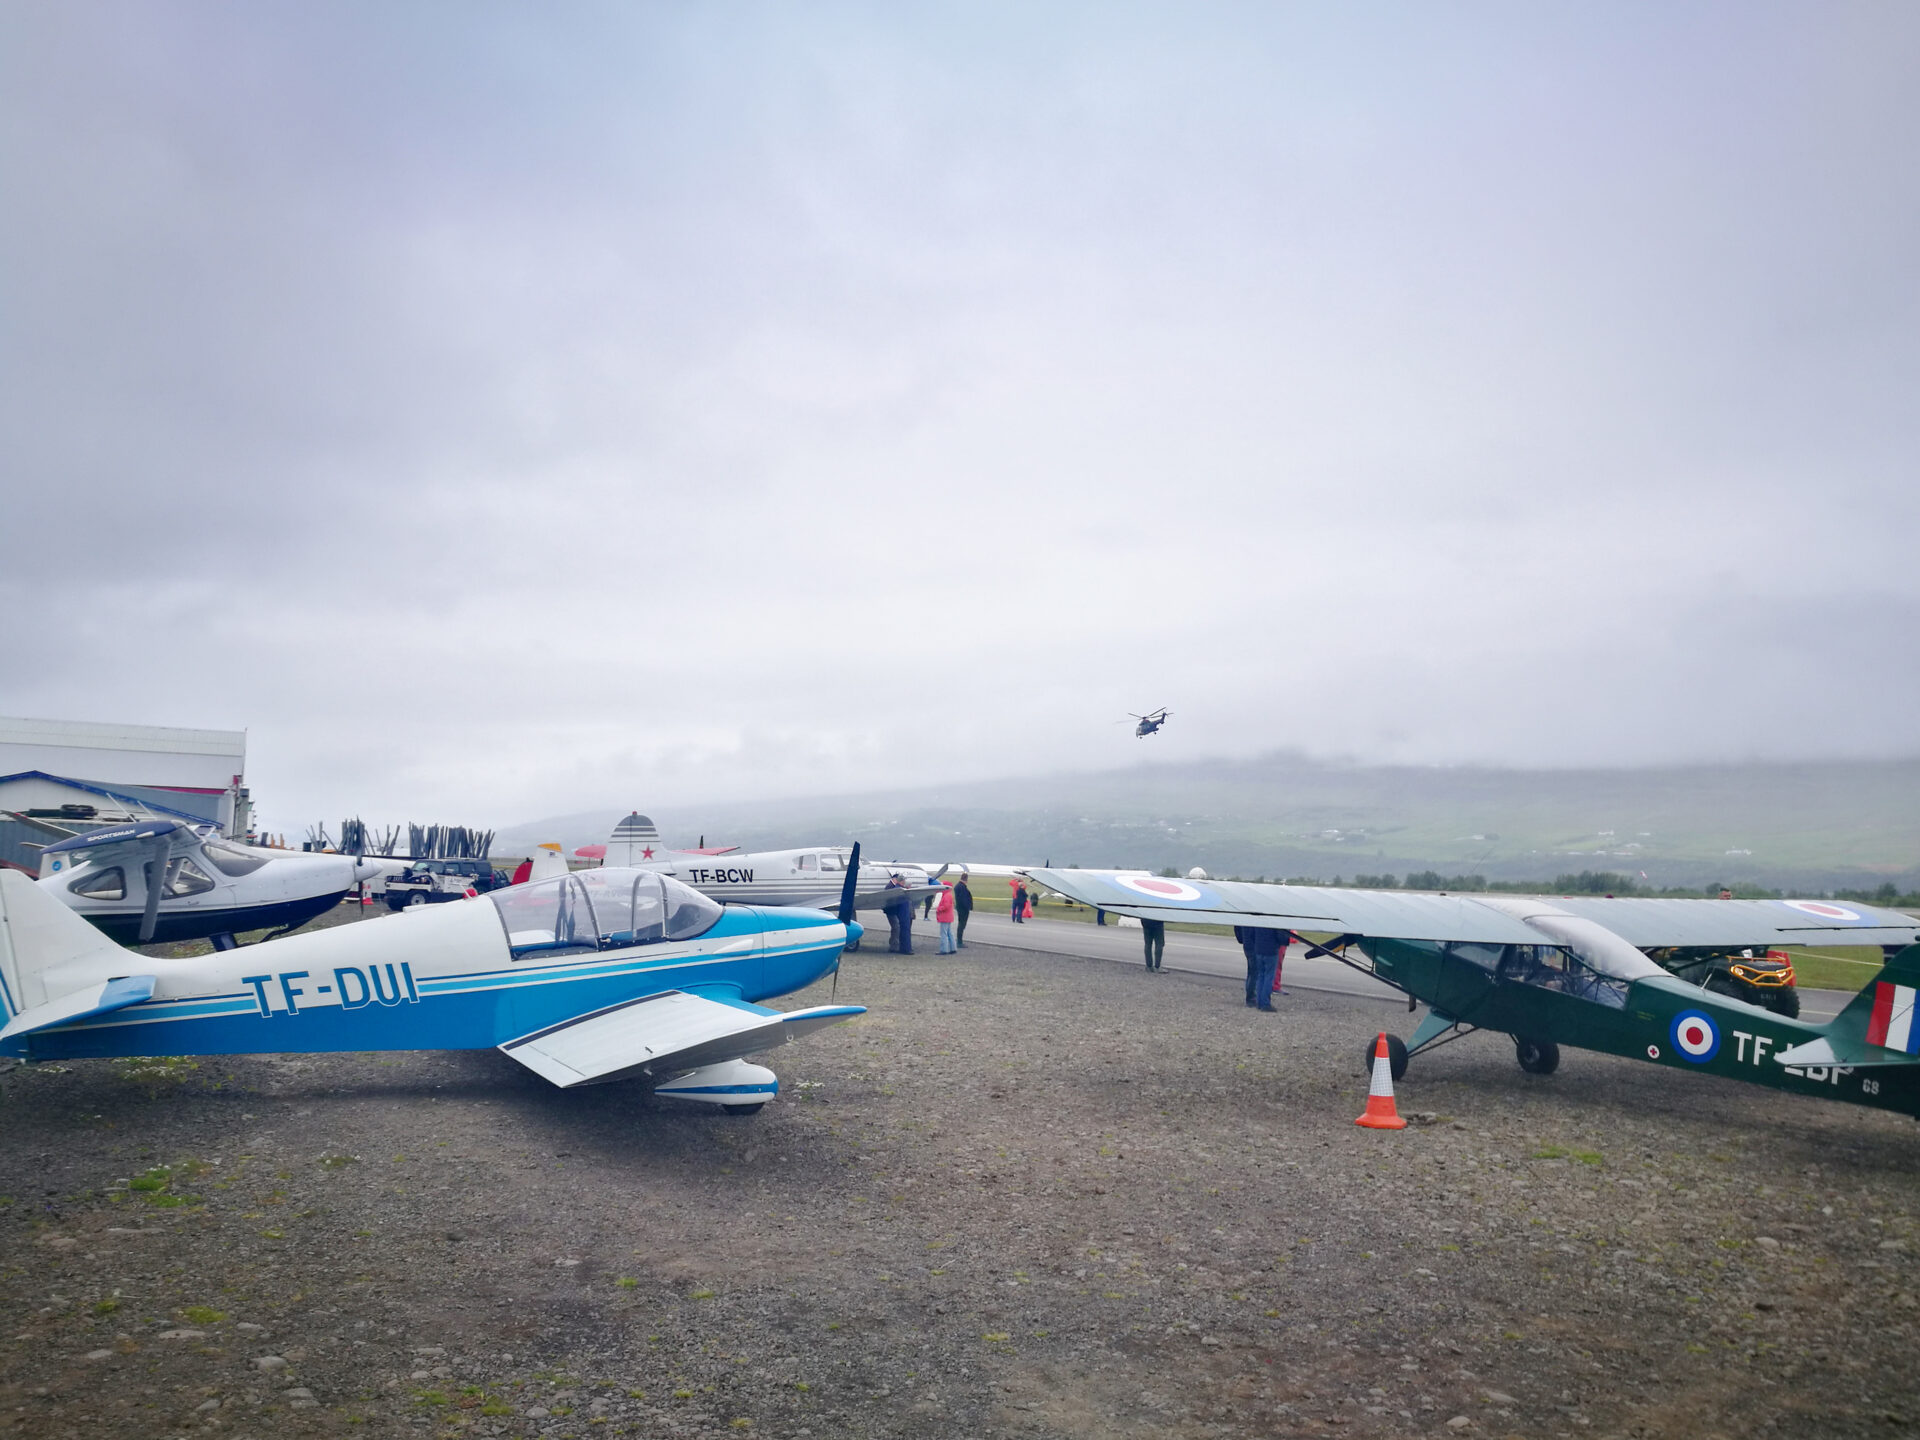 The first post-COVID airshow in Akureyri // Source: Flugblogg